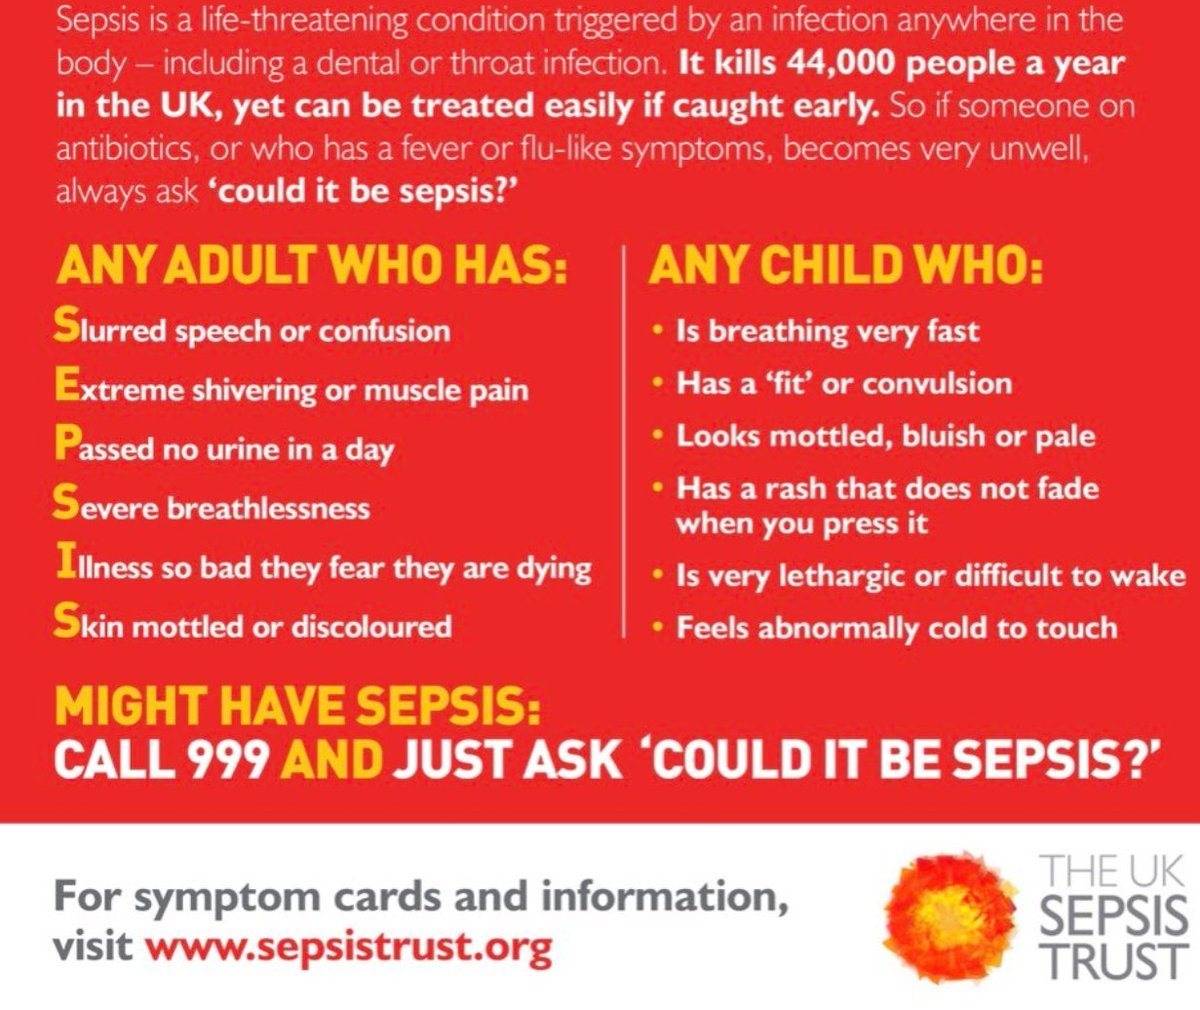 In the UK 5 people an hour die of sepsis. Knowing the signs could save lives #WorldSepsisDay @UKSepsisTrust #marthasrule